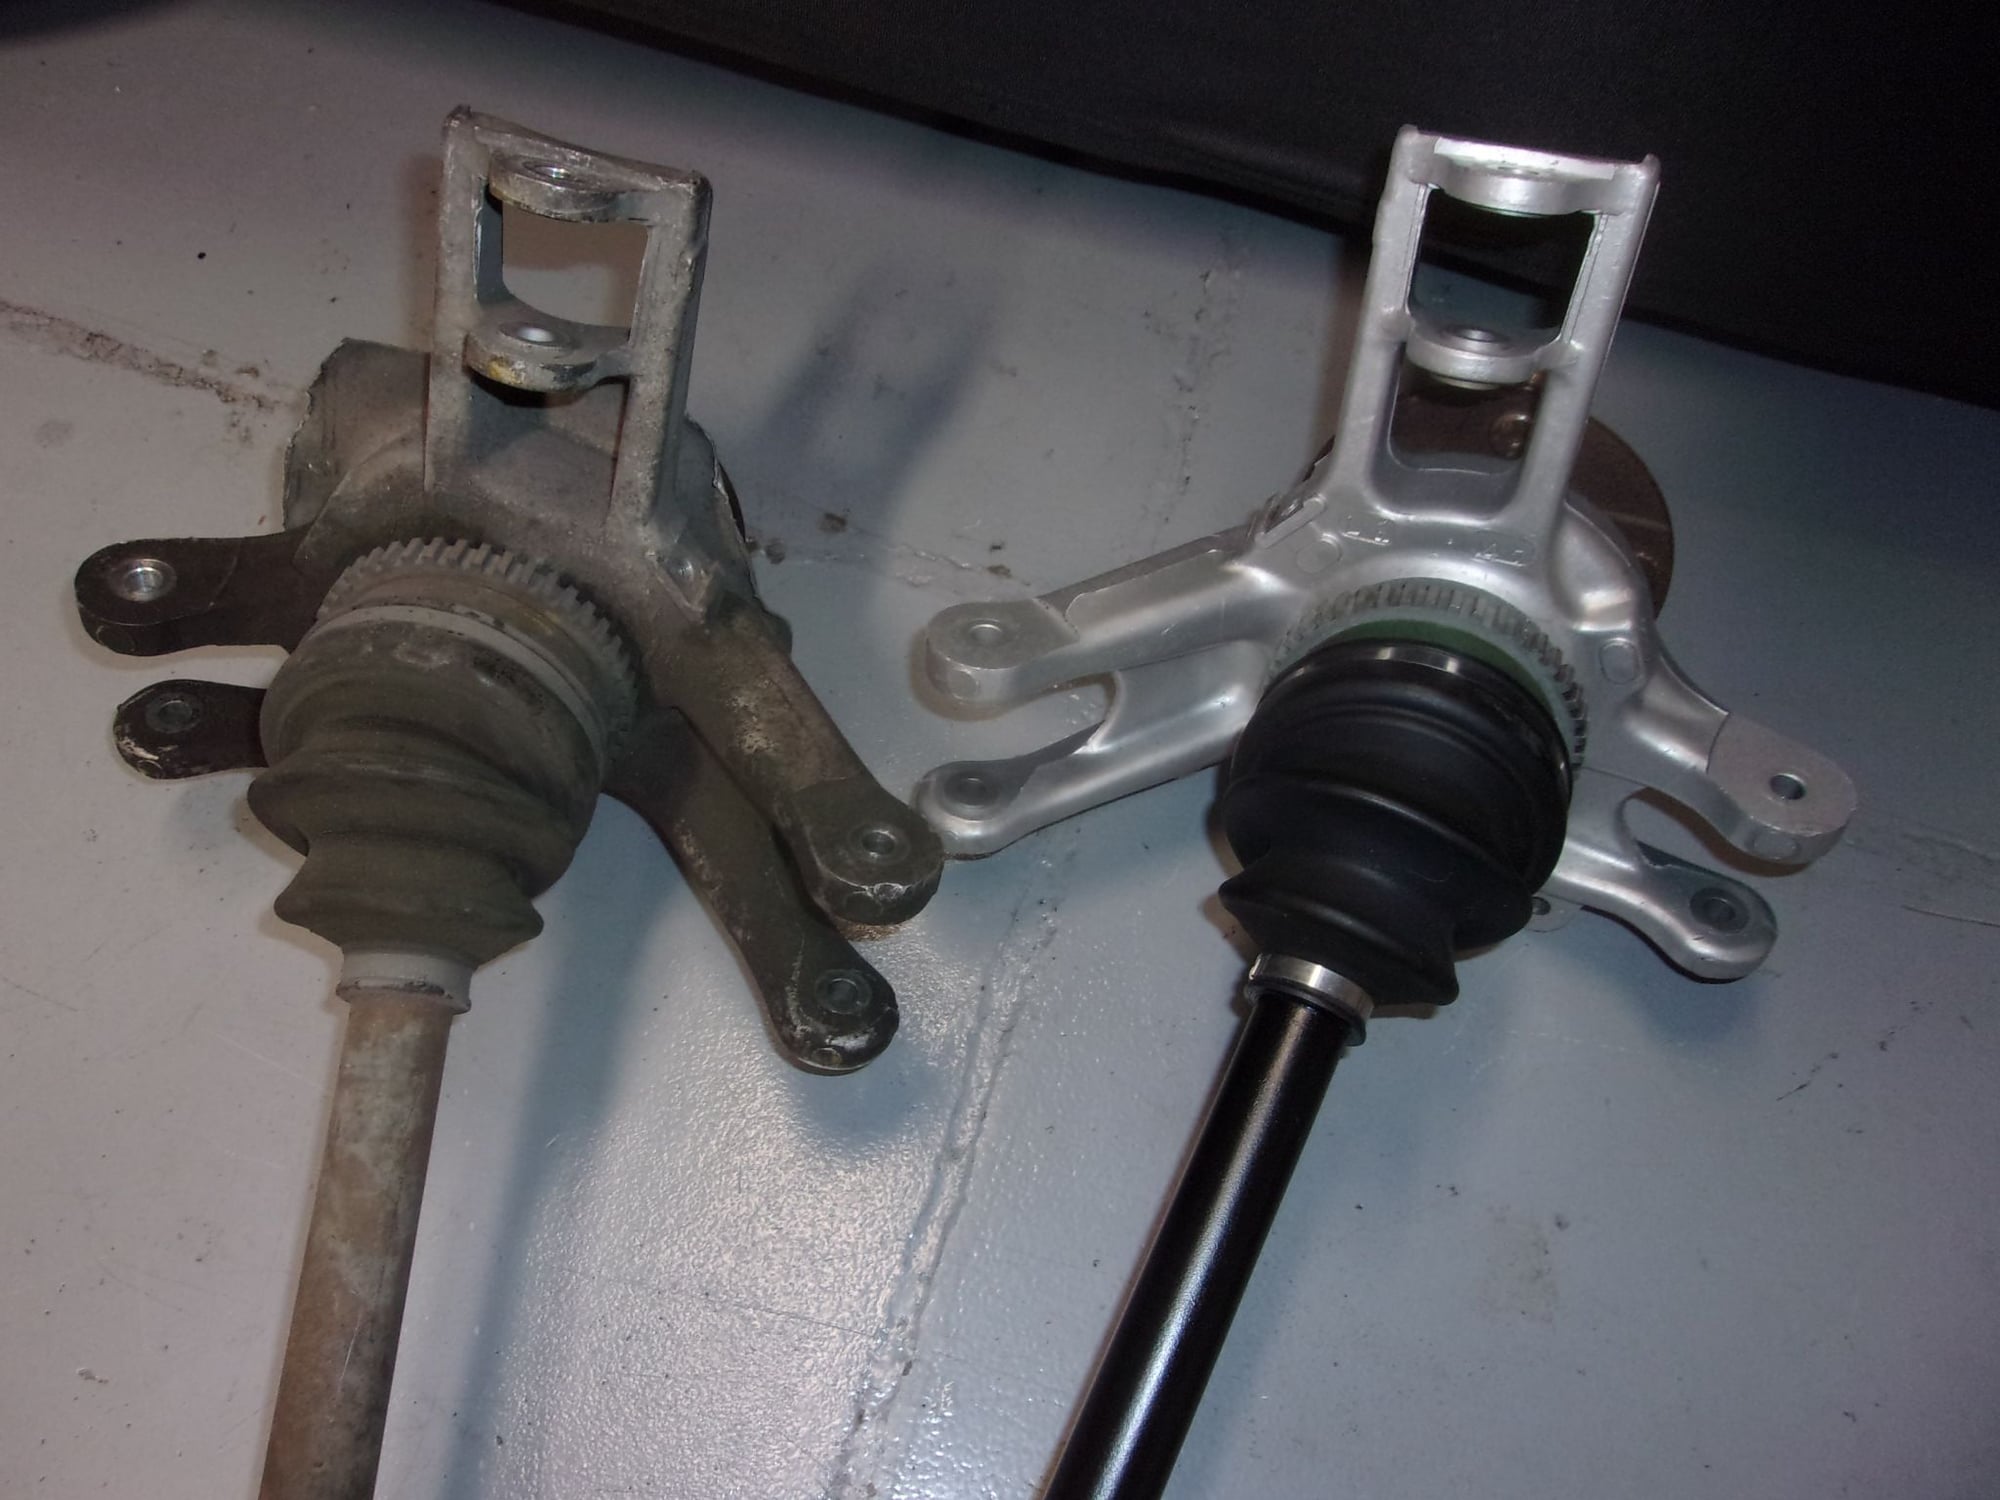 Steering/Suspension - VHT cleaned Suspension Arms & Axles - Used - 1993 to 2002 Mazda RX-7 - Murfreesboro, TN 37130, United States